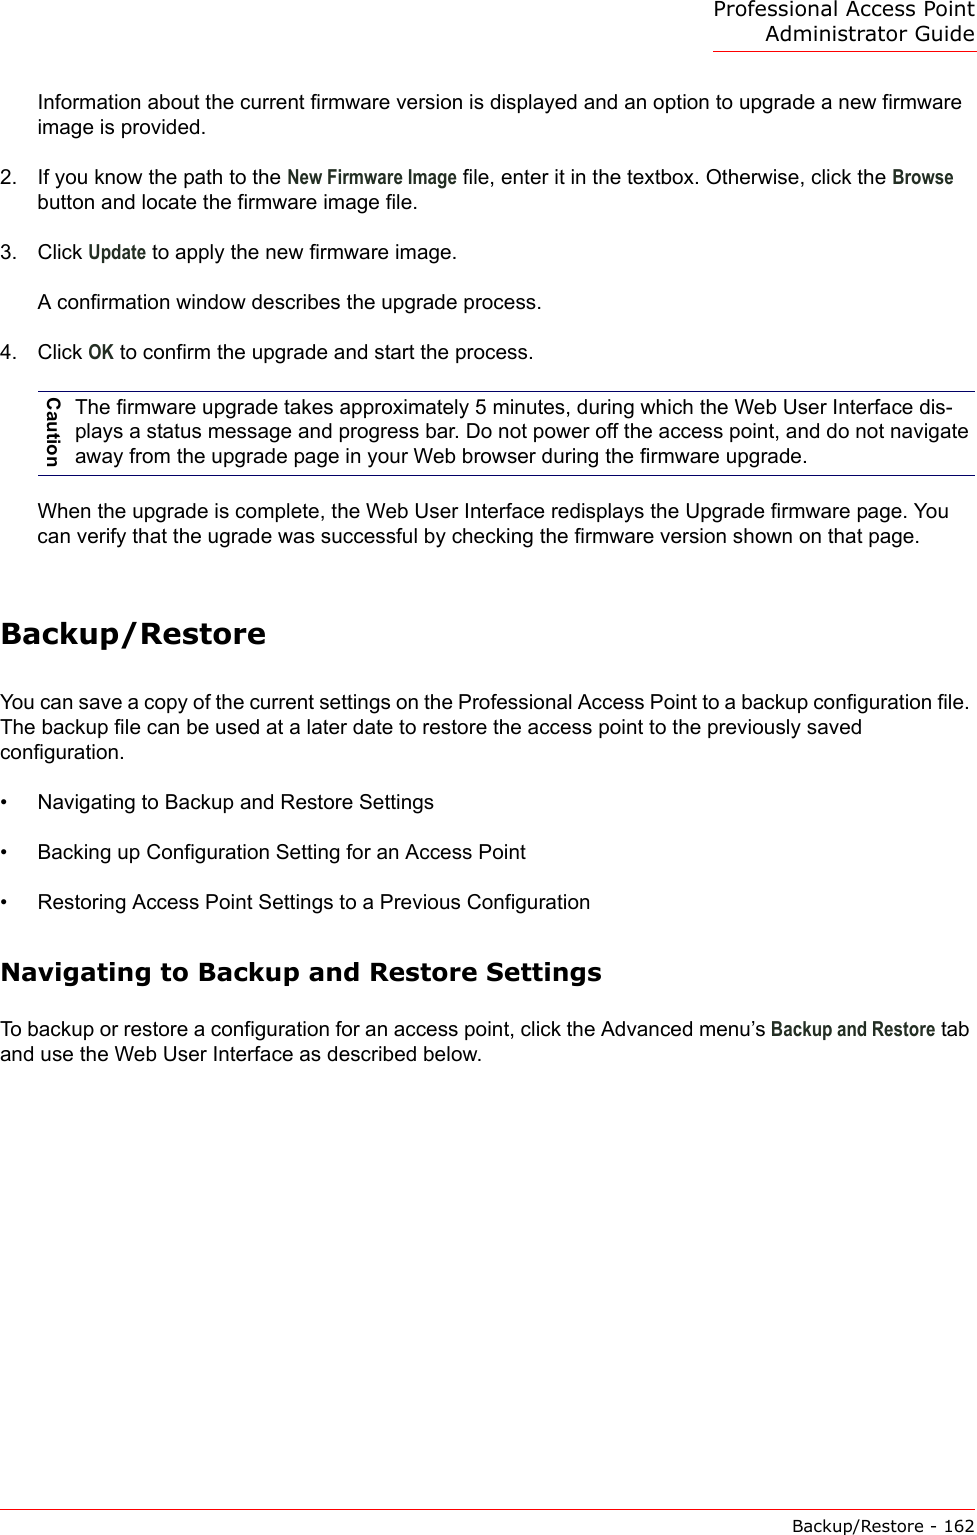 Professional Access Point Administrator GuideBackup/Restore - 162Information about the current firmware version is displayed and an option to upgrade a new firmware image is provided.2. If you know the path to the New Firmware Image file, enter it in the textbox. Otherwise, click the Browse button and locate the firmware image file.3. Click Update to apply the new firmware image.A confirmation window describes the upgrade process.4. Click OK to confirm the upgrade and start the process.When the upgrade is complete, the Web User Interface redisplays the Upgrade firmware page. You can verify that the ugrade was successful by checking the firmware version shown on that page.Backup/RestoreYou can save a copy of the current settings on the Professional Access Point to a backup configuration file. The backup file can be used at a later date to restore the access point to the previously saved configuration.•Navigating to Backup and Restore Settings•Backing up Configuration Setting for an Access Point•Restoring Access Point Settings to a Previous ConfigurationNavigating to Backup and Restore SettingsTo backup or restore a configuration for an access point, click the Advanced menu’s Backup and Restore tab and use the Web User Interface as described below.CautionThe firmware upgrade takes approximately 5 minutes, during which the Web User Interface dis-plays a status message and progress bar. Do not power off the access point, and do not navigate away from the upgrade page in your Web browser during the firmware upgrade.